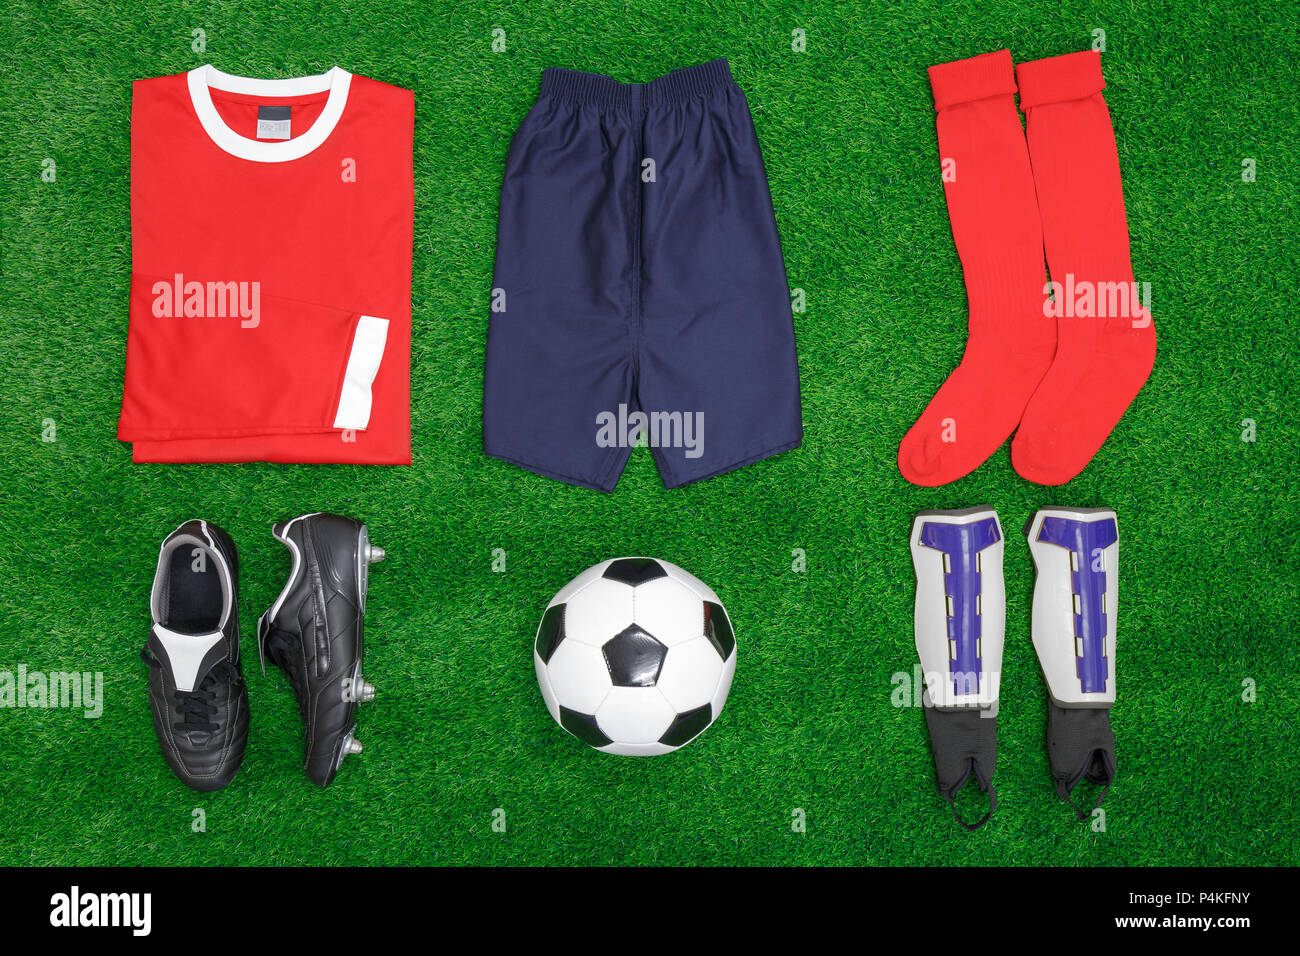 A flat lay arrangement of football or soccer kit on grass, with shirt, shorts,socks, boots, shin pads and ball. Stock Photo